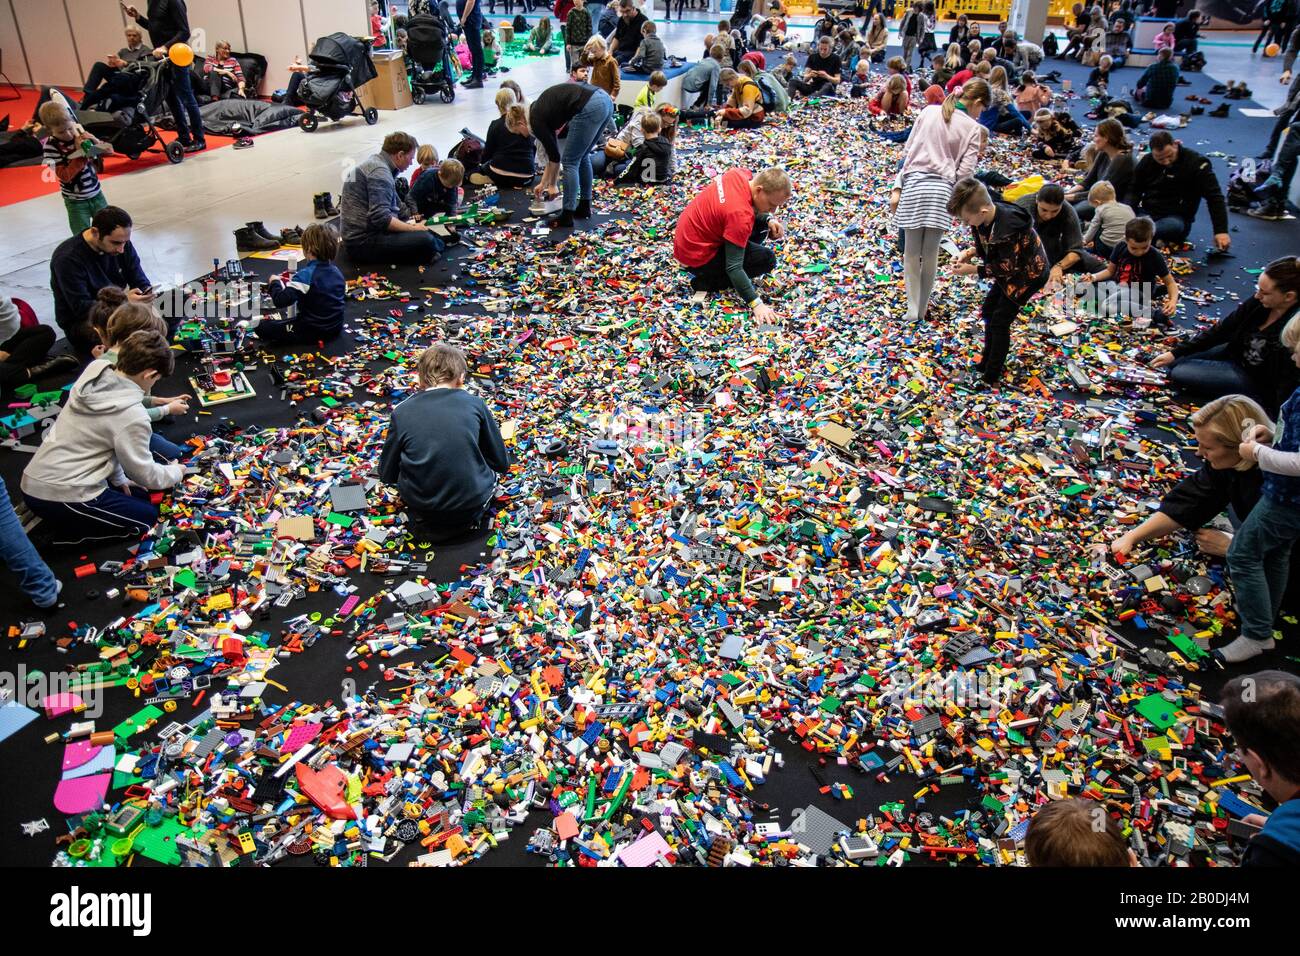 Copenhagen, Denmark. 13th Feb, 2017. Children and adults of all ages go crazy at the annual LEGO World event in Bella Center Copenhagen. LEGO is the largest toy company by